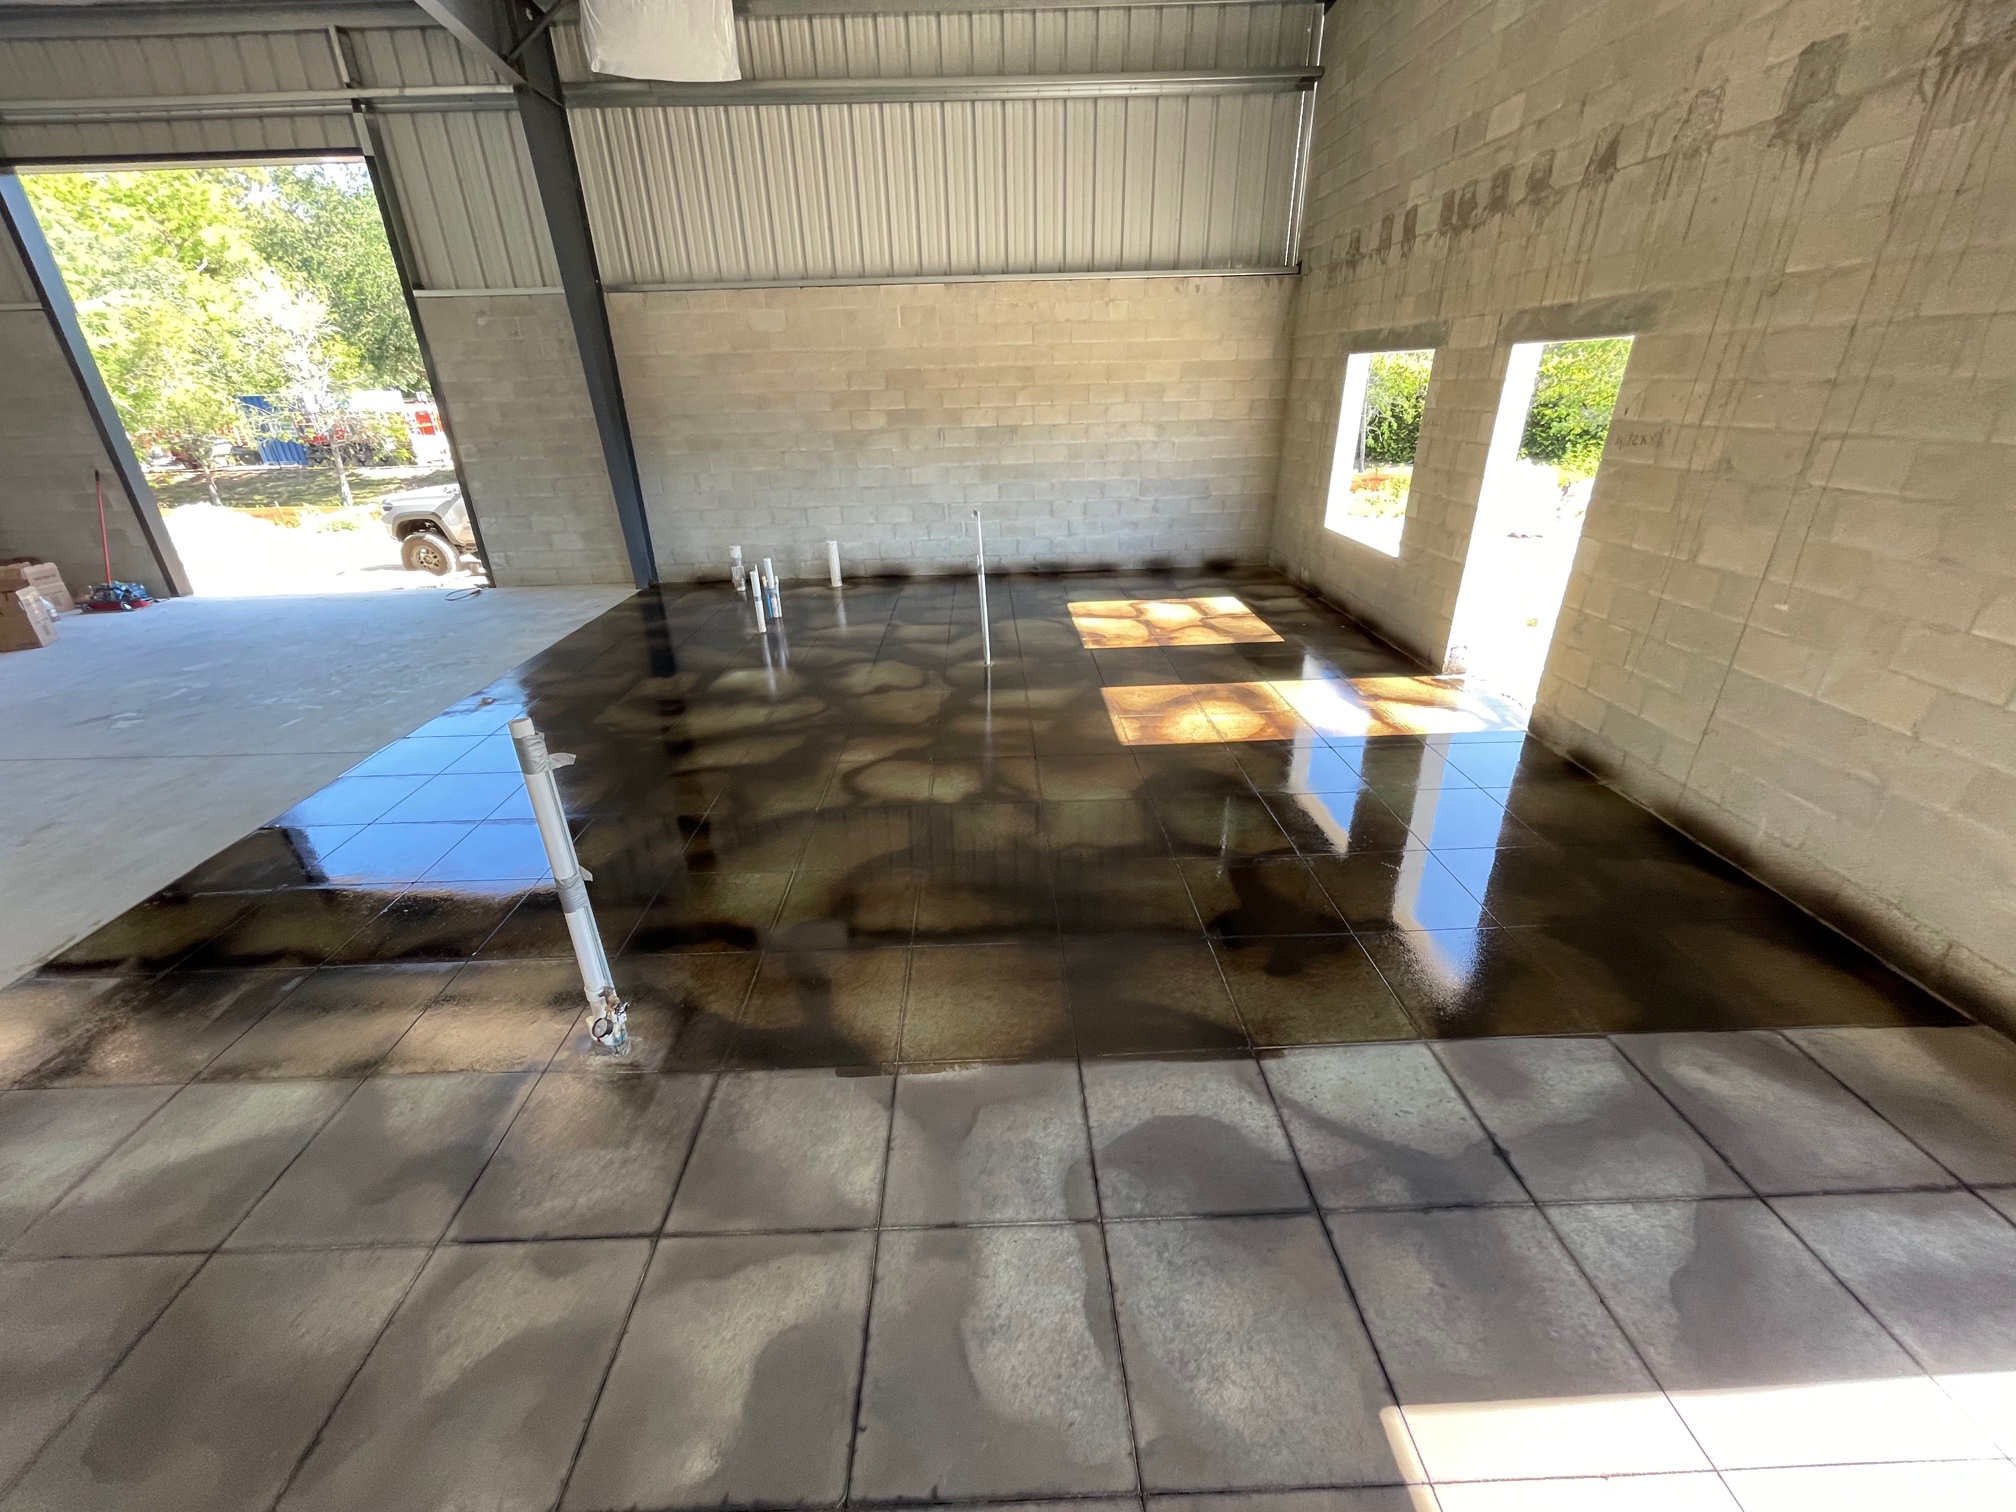 Photo of a concrete floor showcasing 3/4 of its surface, with the first coat of sealer applied, revealing vibrant, popping colors compared to the unsealed chalky light area.